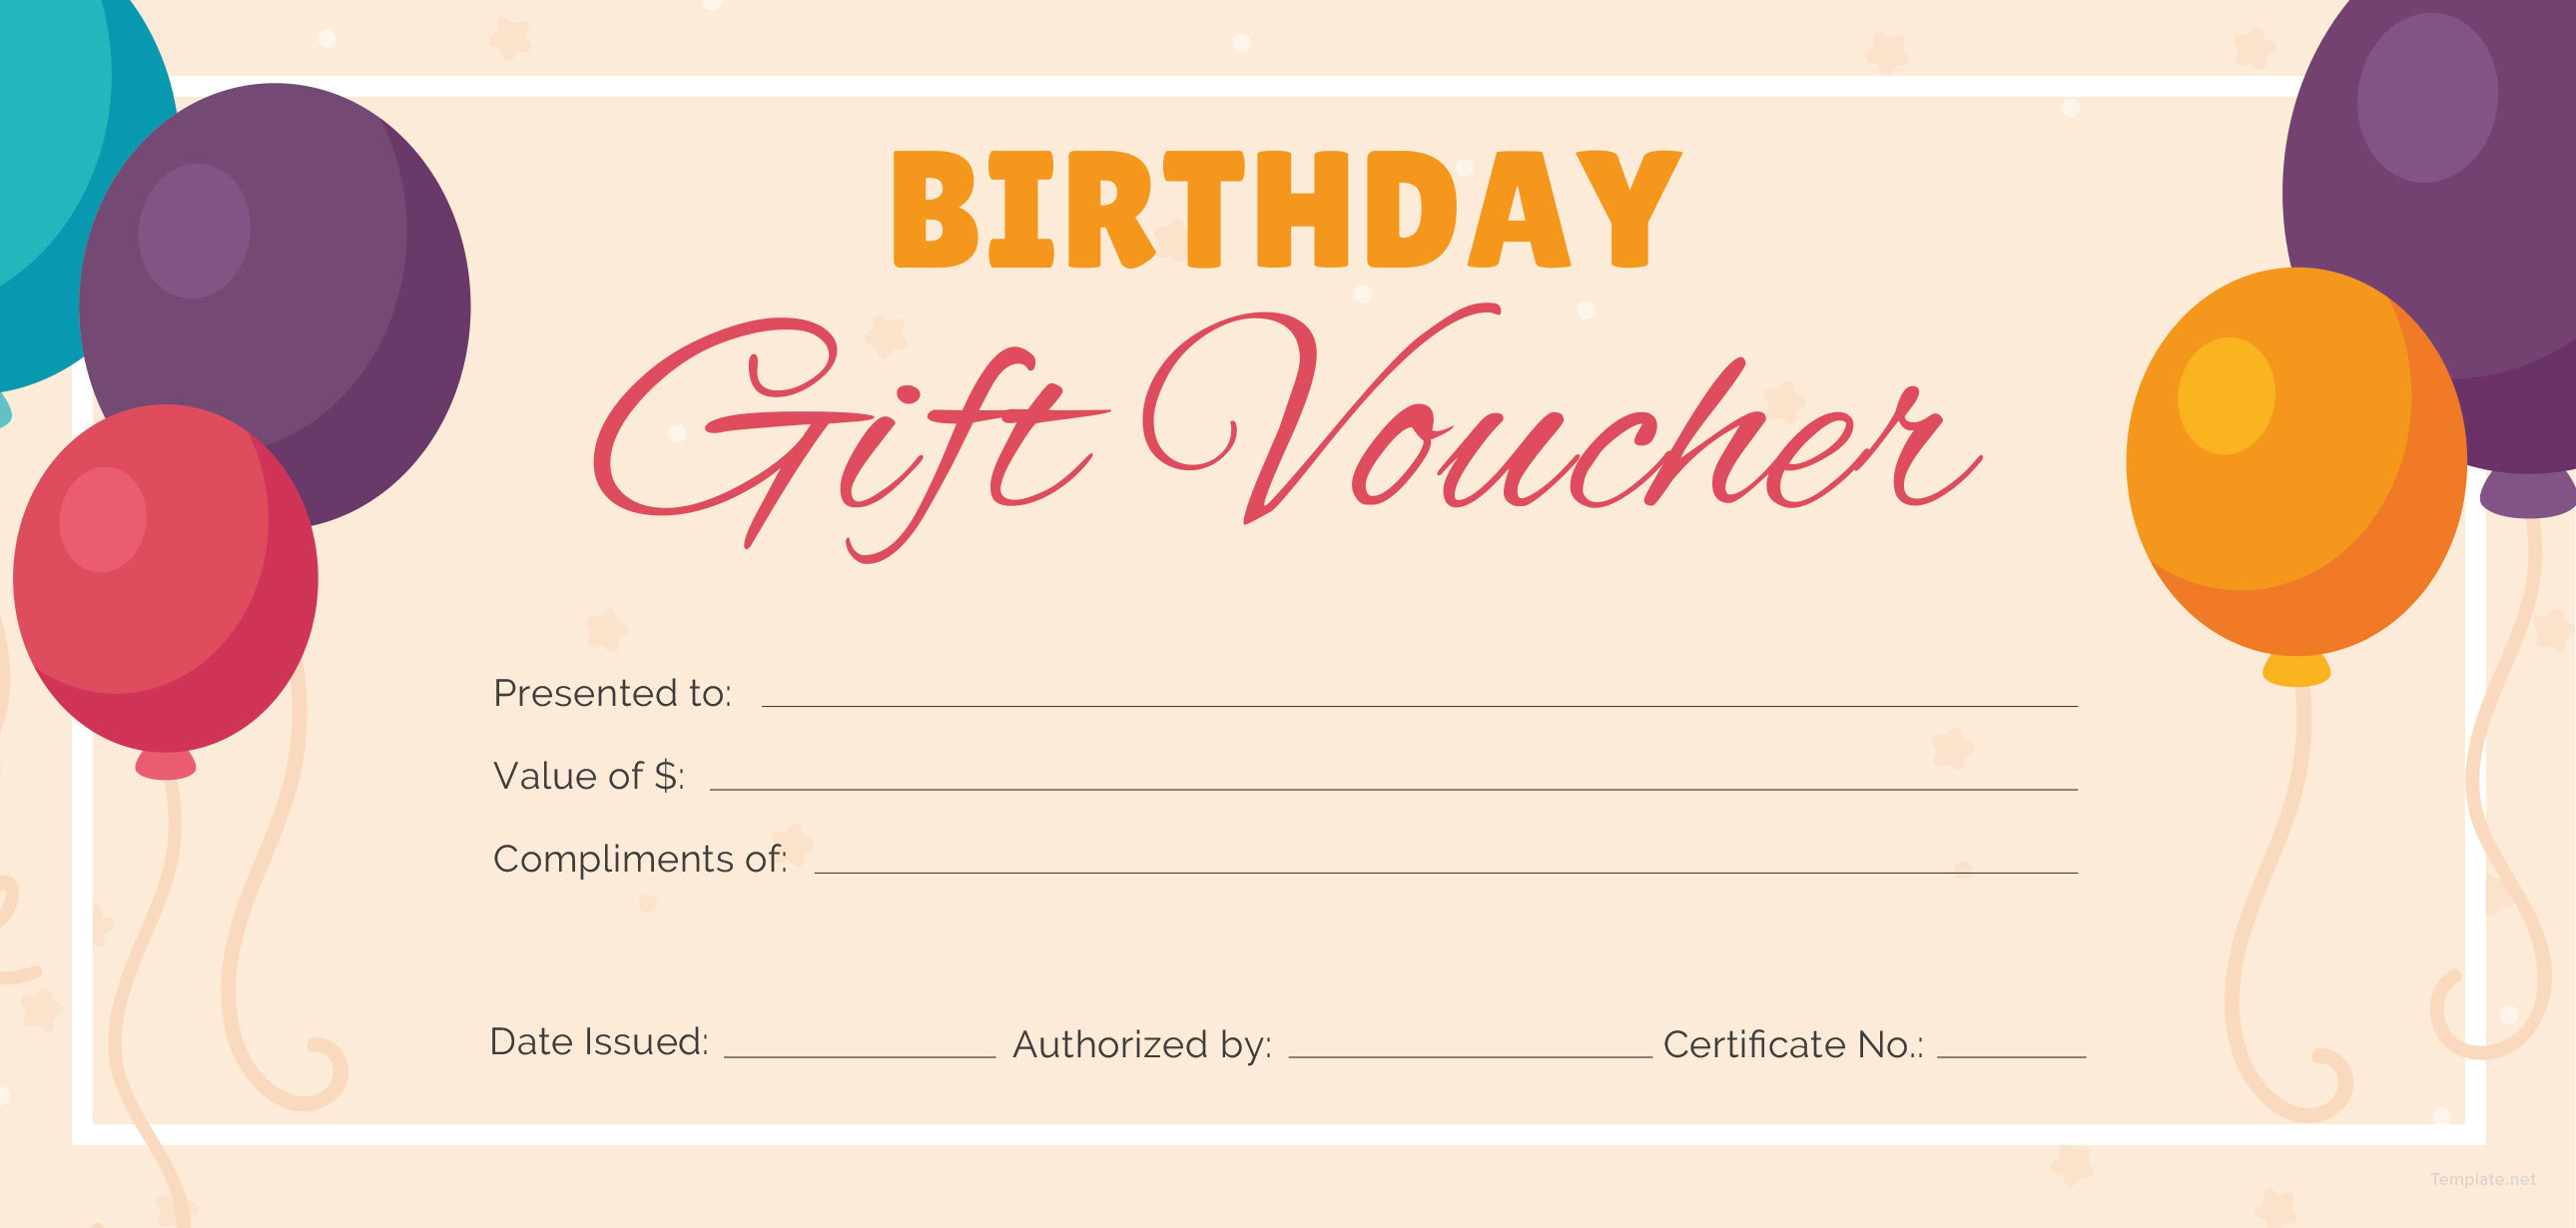 birthday-gift-certificate-candles-and-cake-gift-certificate